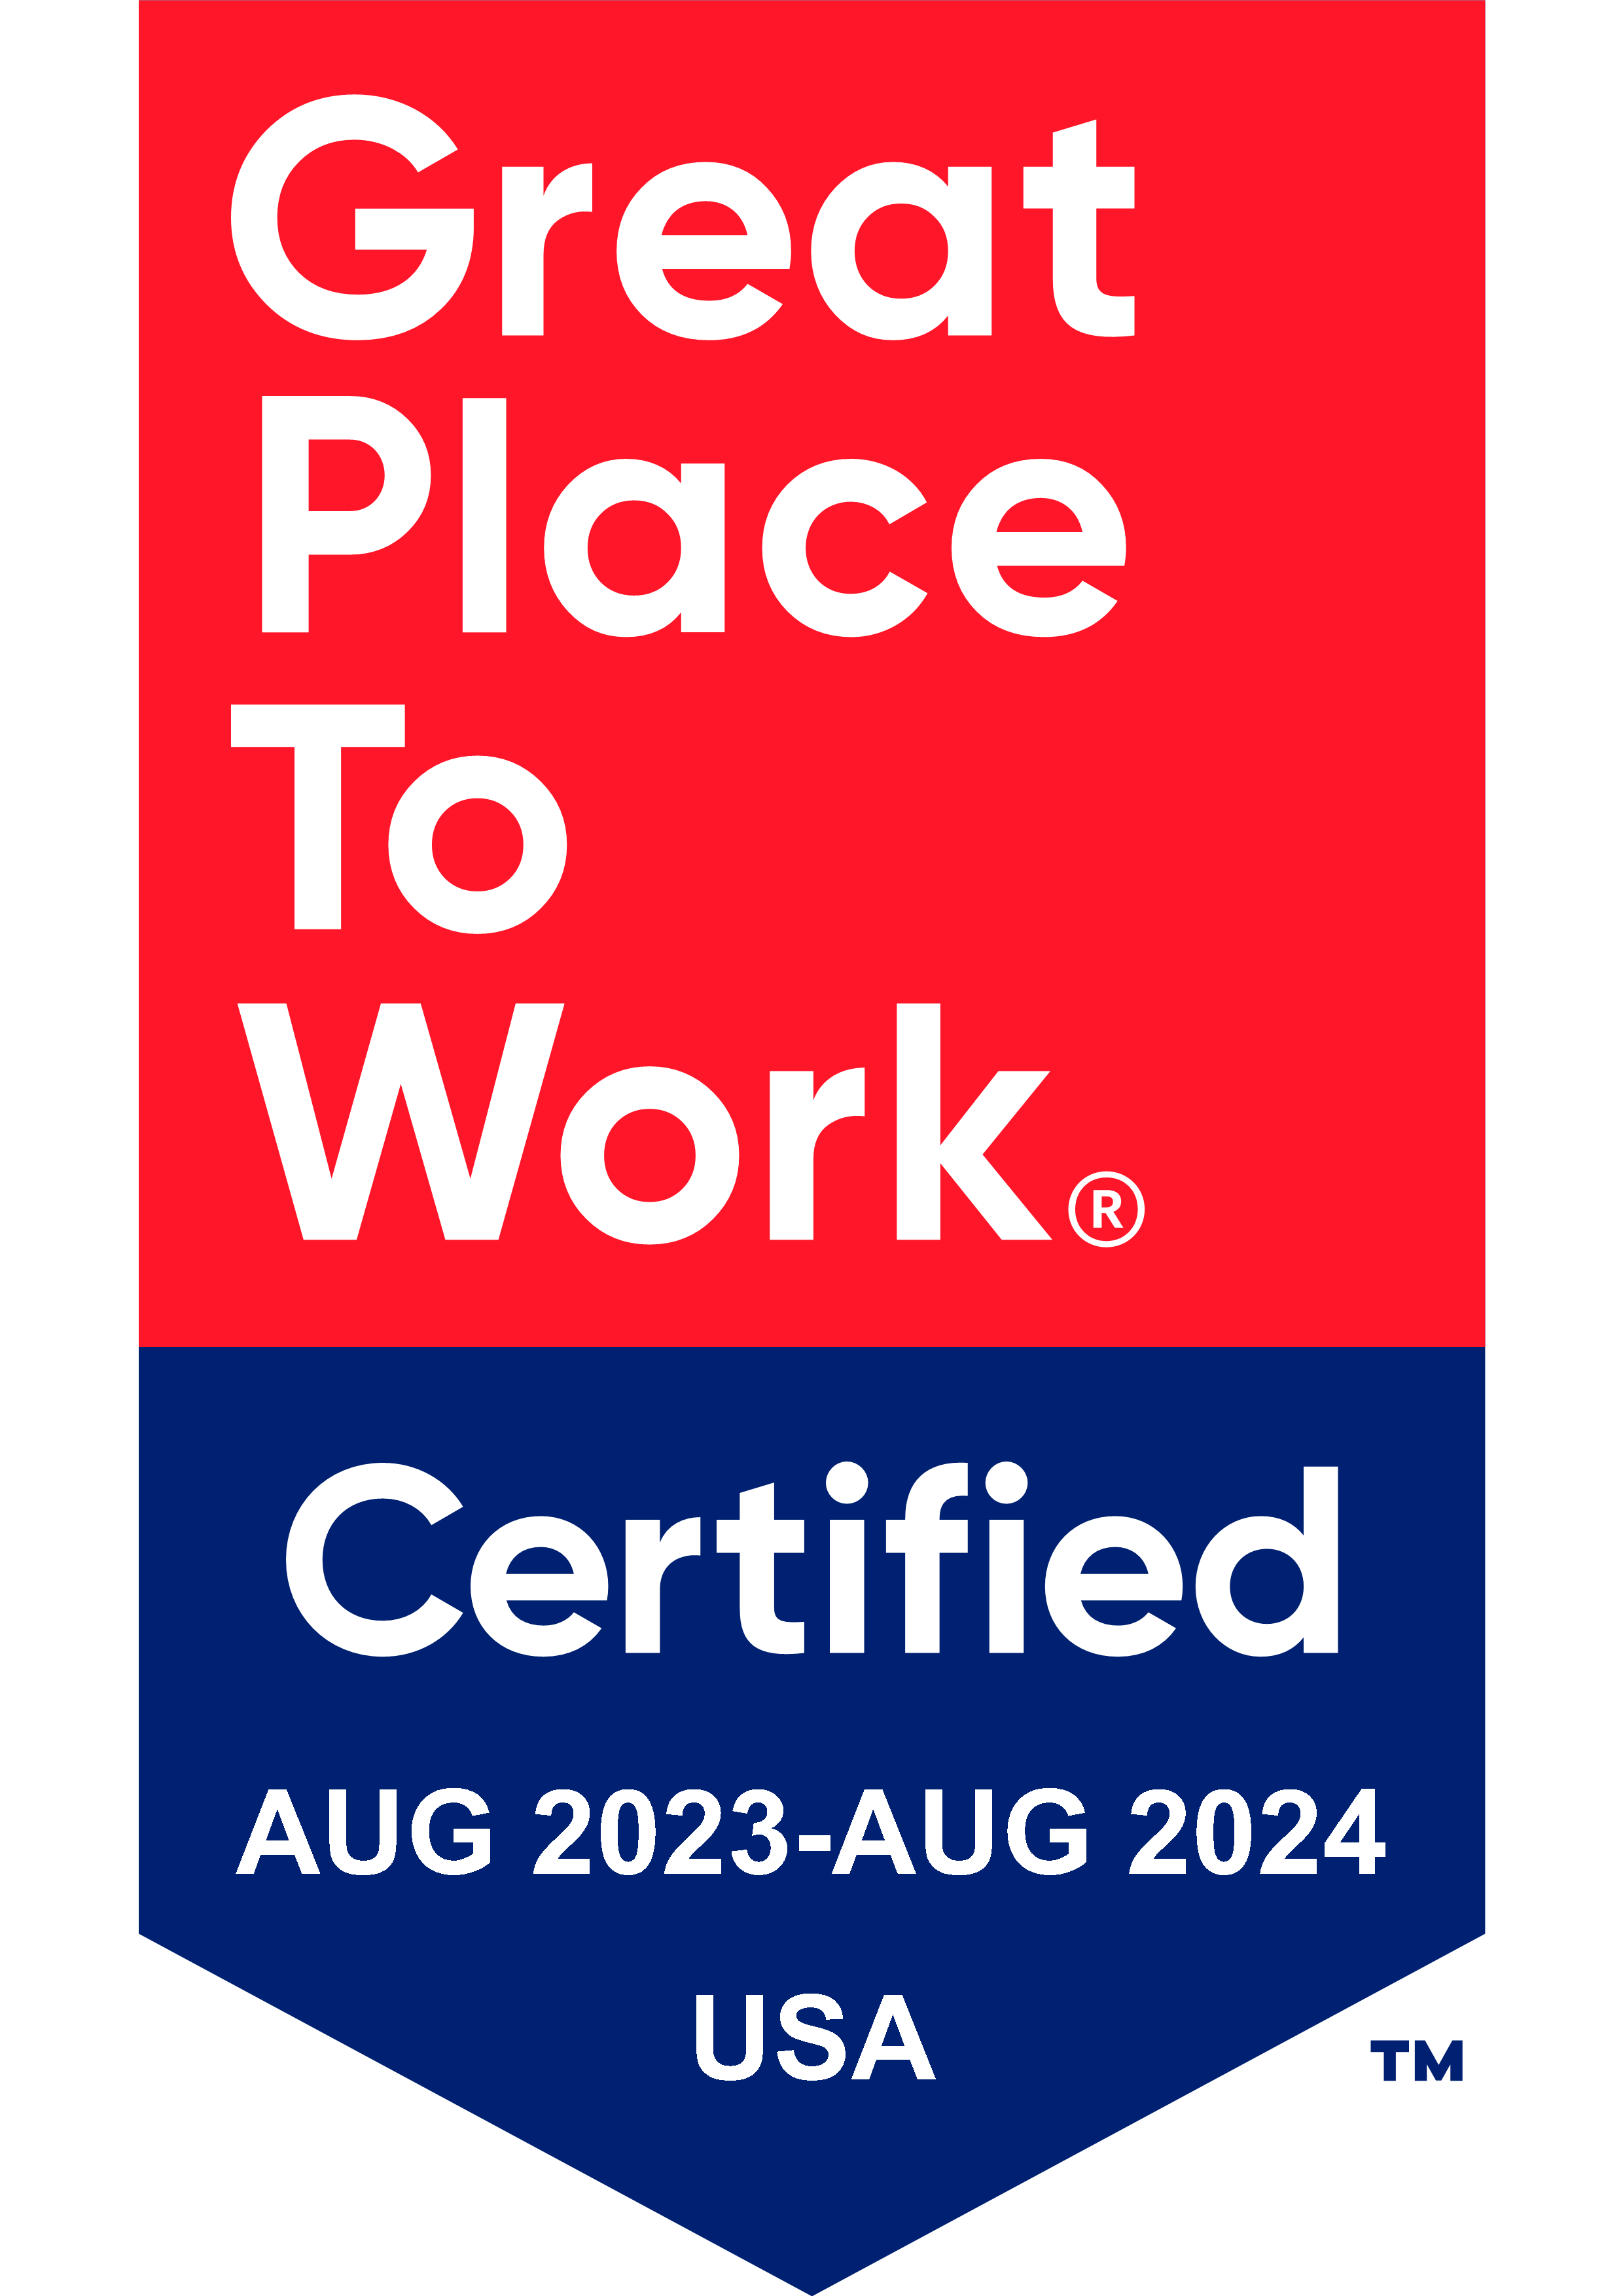 Great Place to Work Certified Aug 2023-Aug 2024